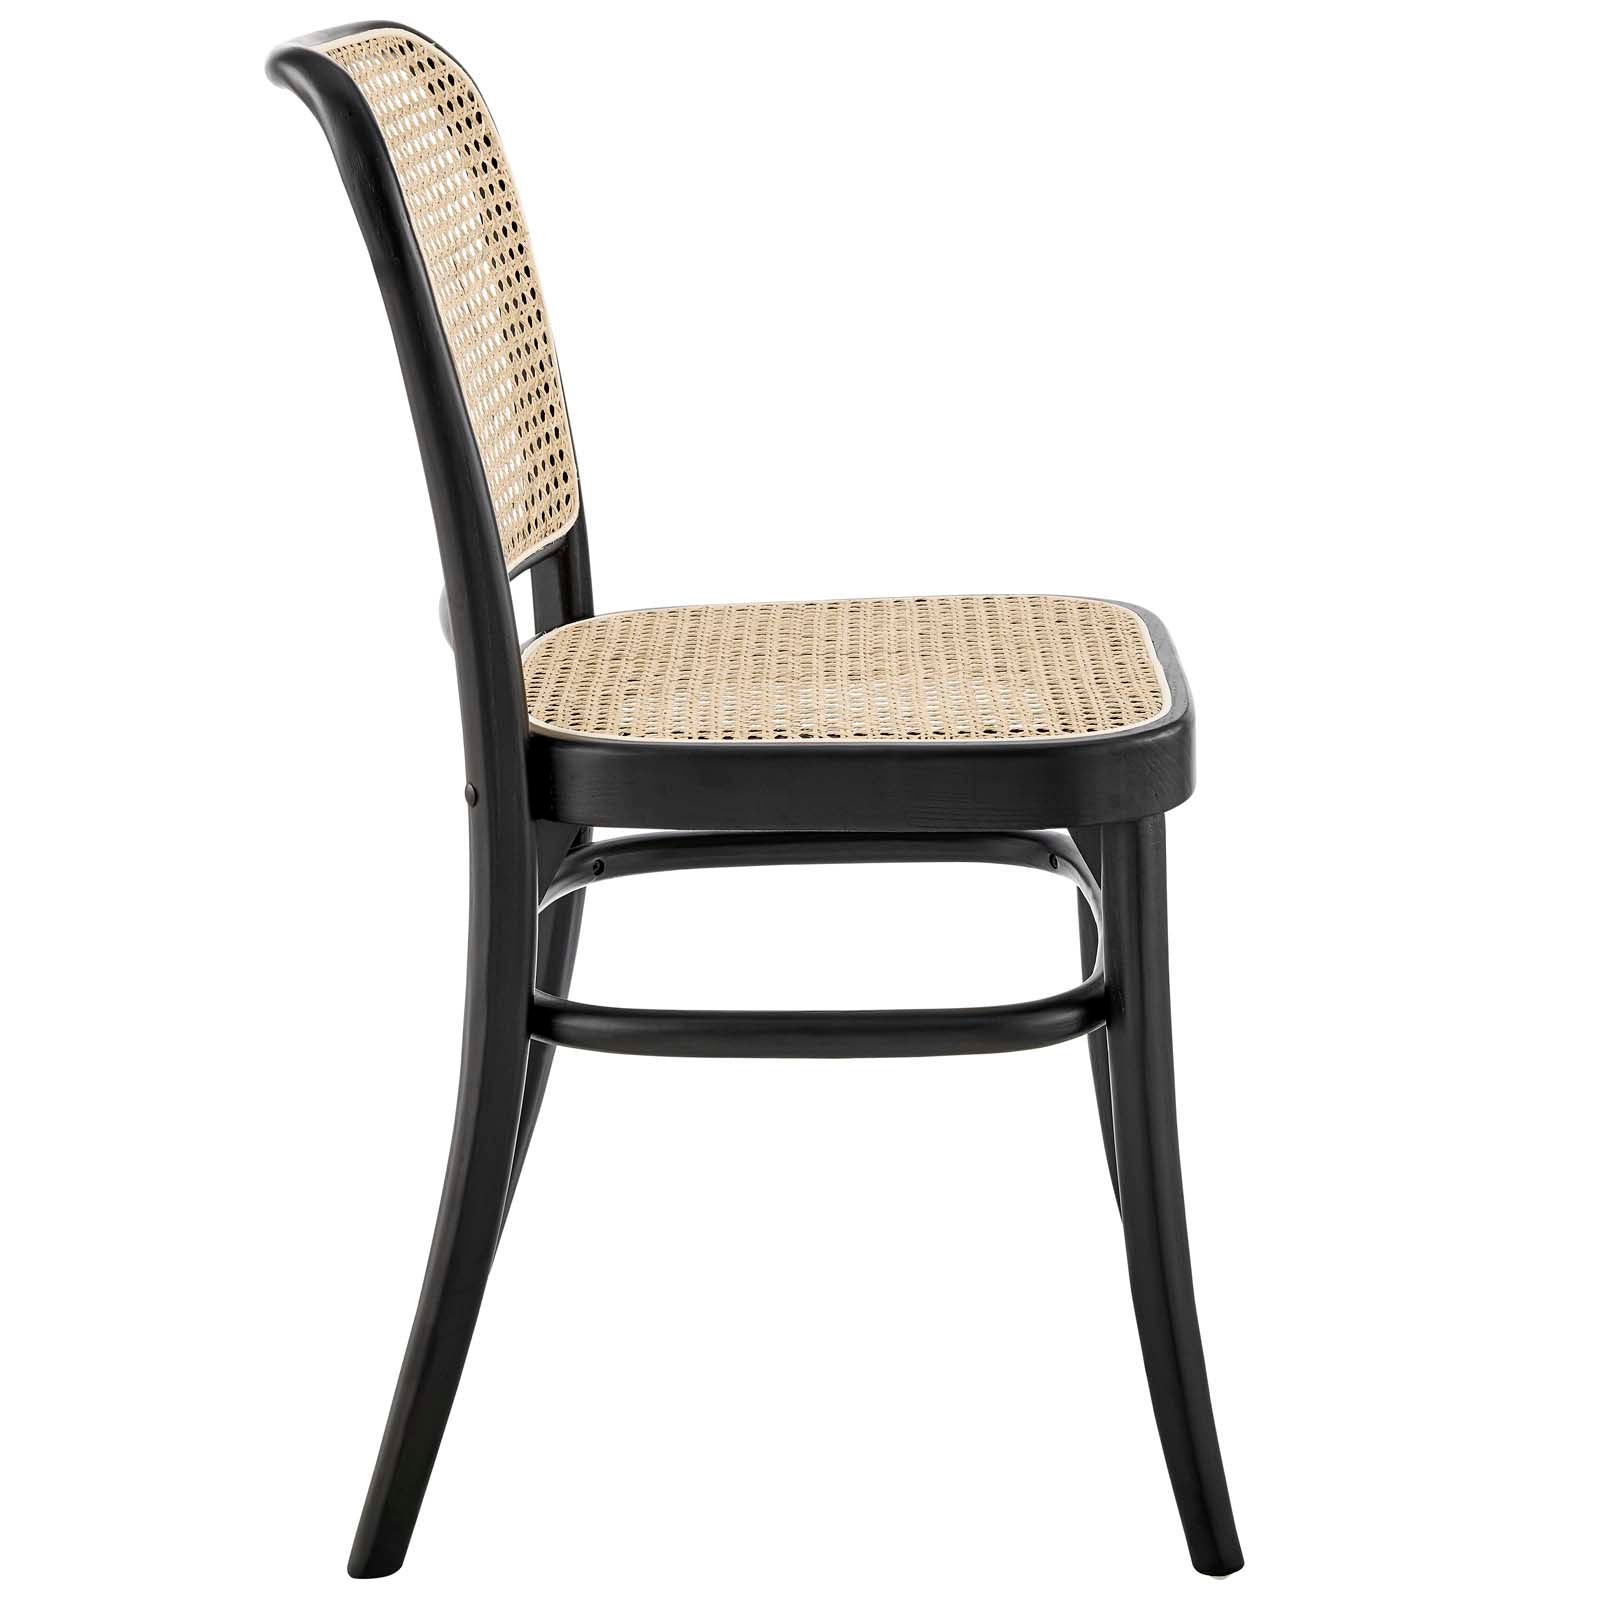 Winona Wood Dining Side Chair - East Shore Modern Home Furnishings